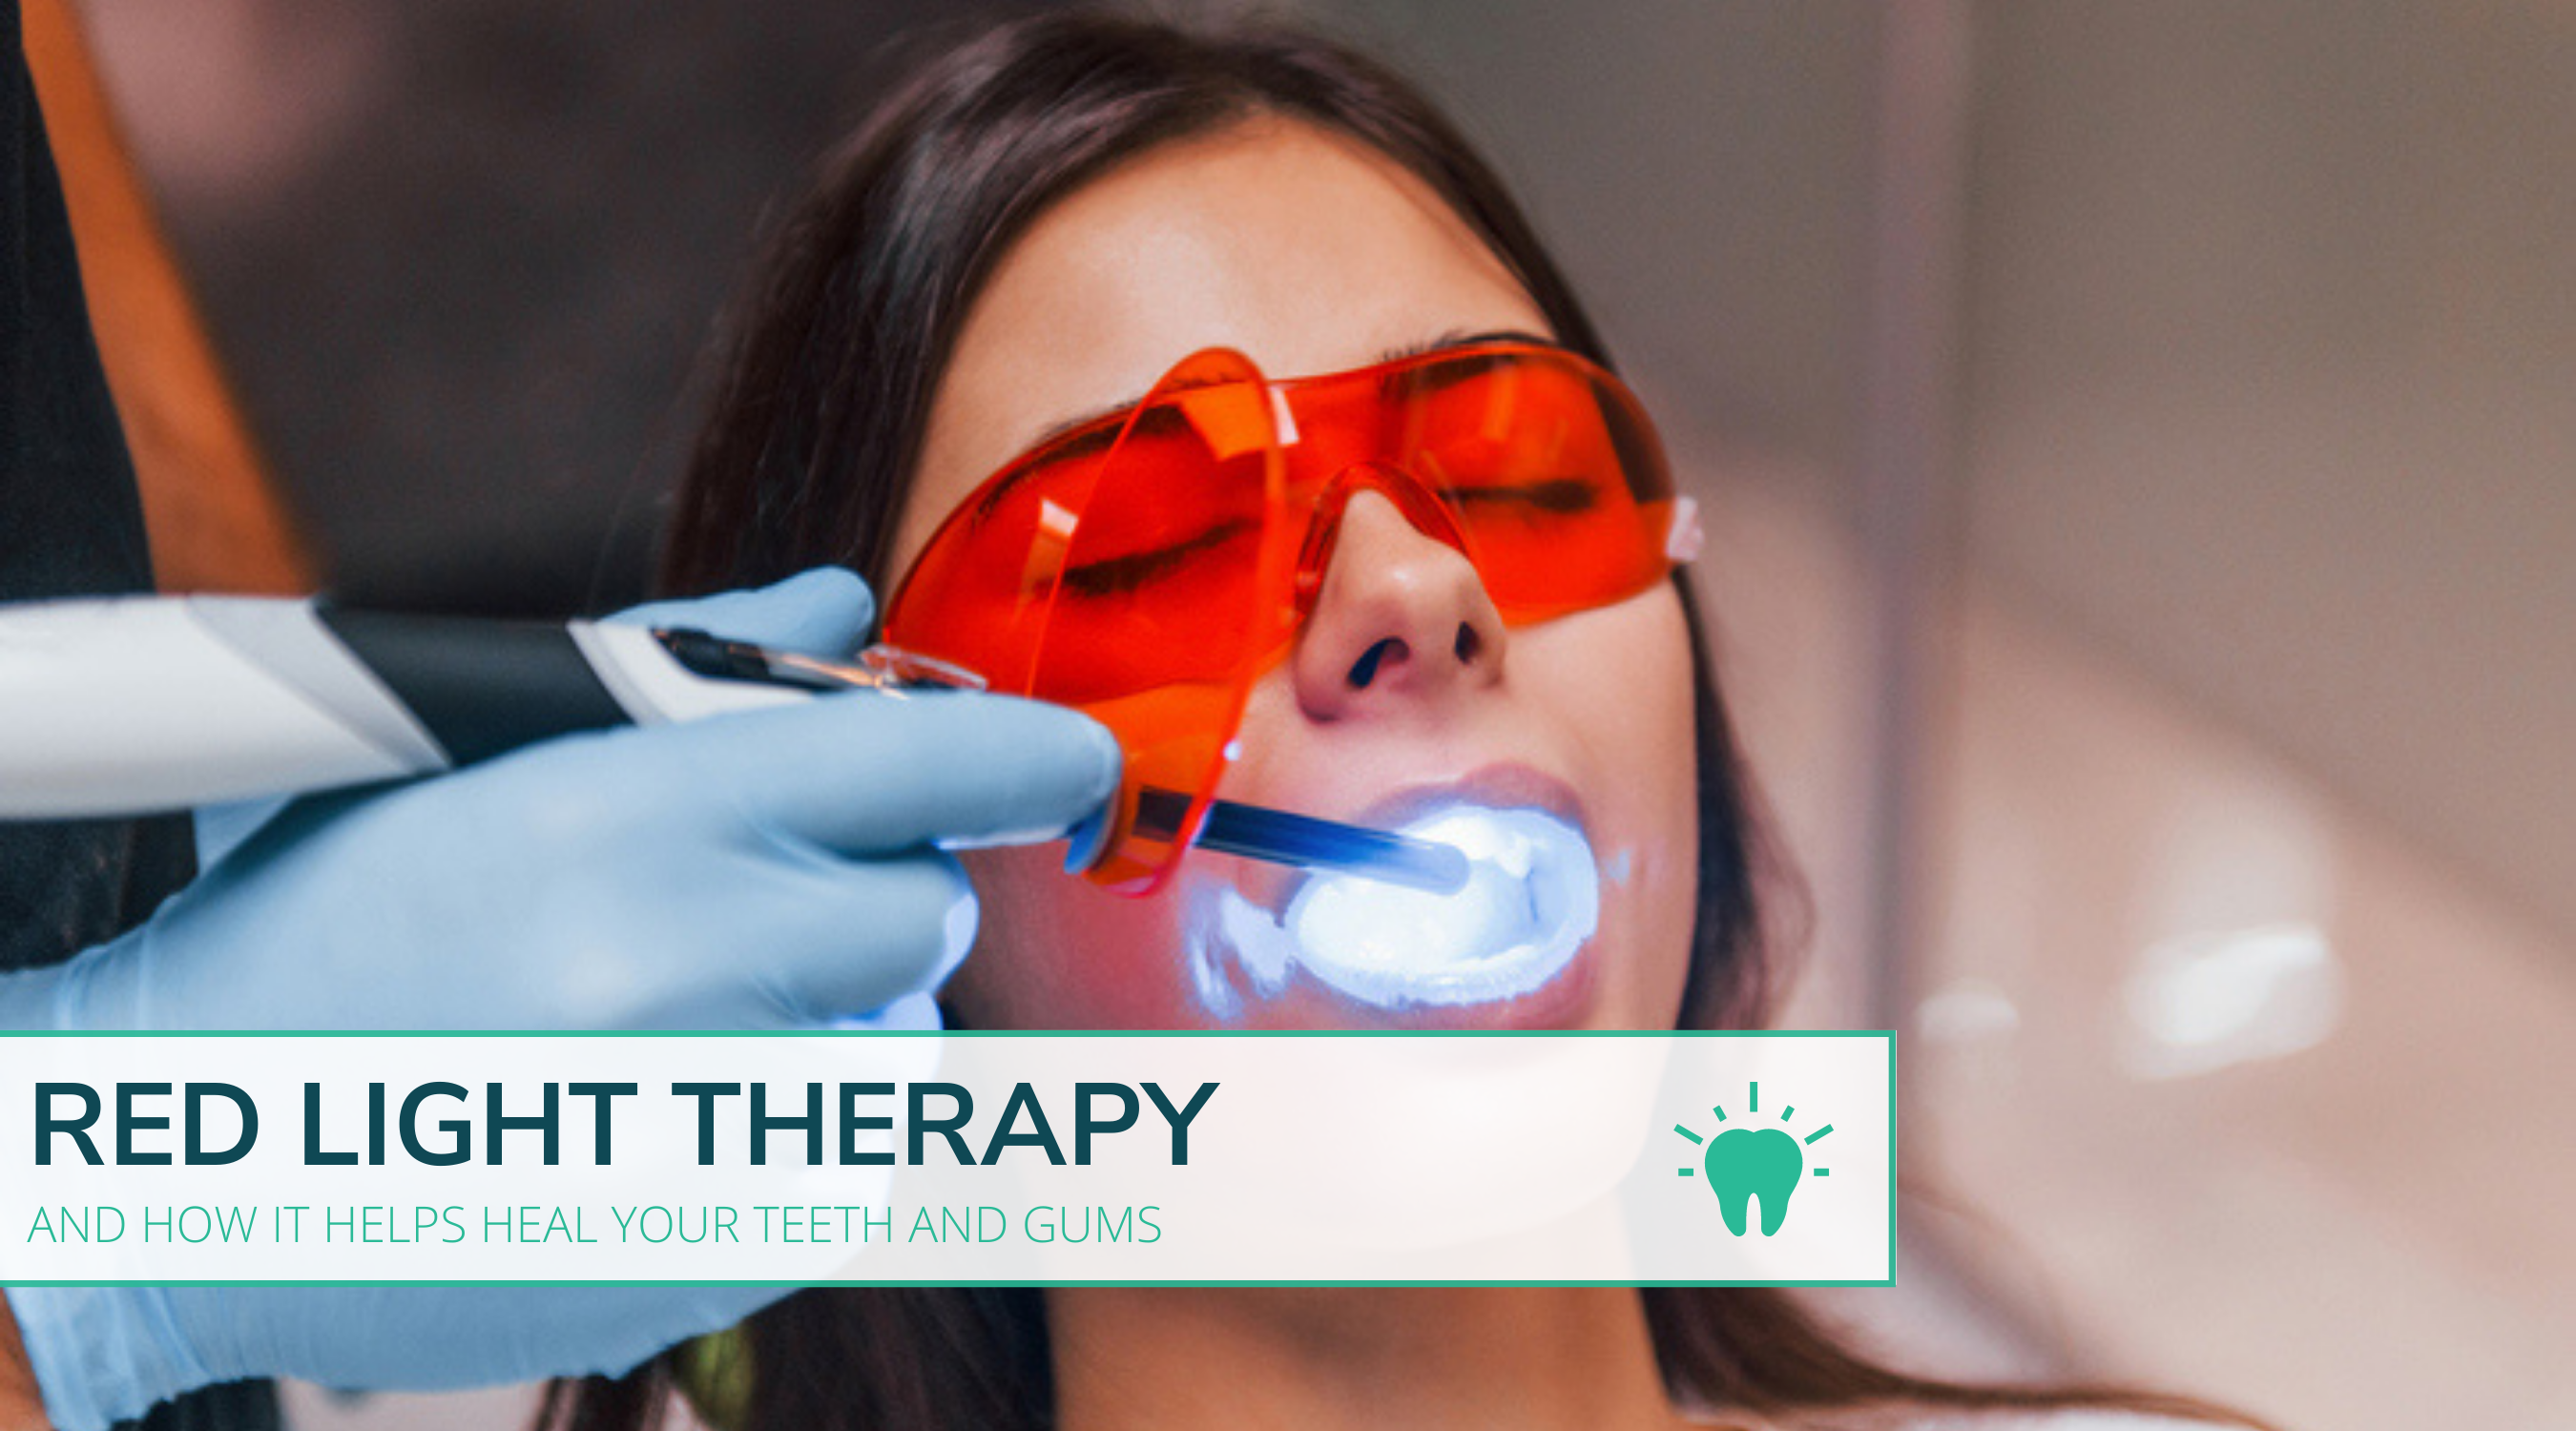 How Red Light Therapy Helps To Heal Teeth And Gums